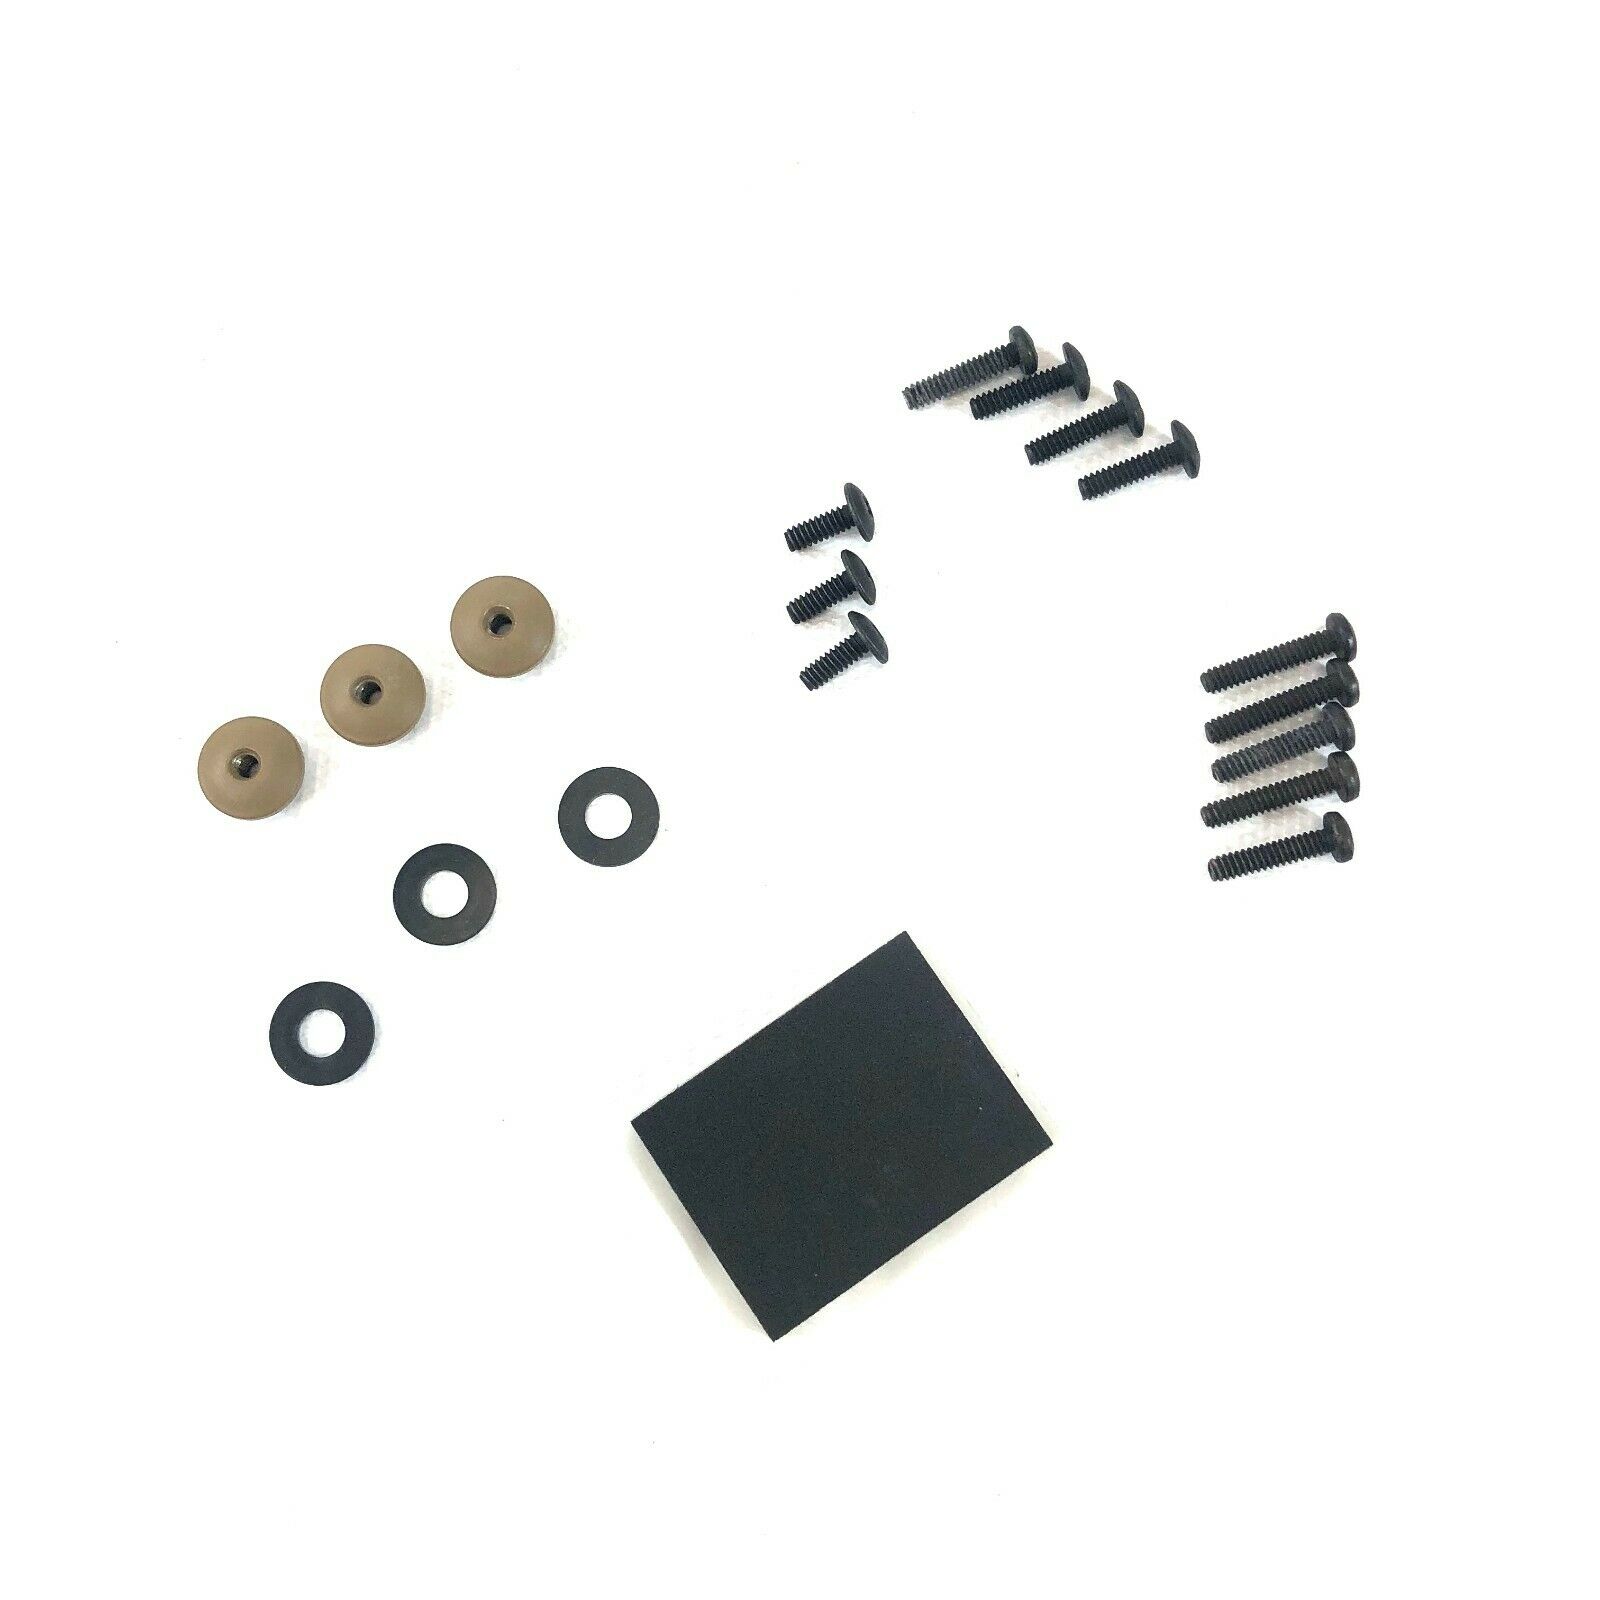 Ops-core 3 Hole Shroud Replacement Hardware Kit, Various Screw Lengths, Tan